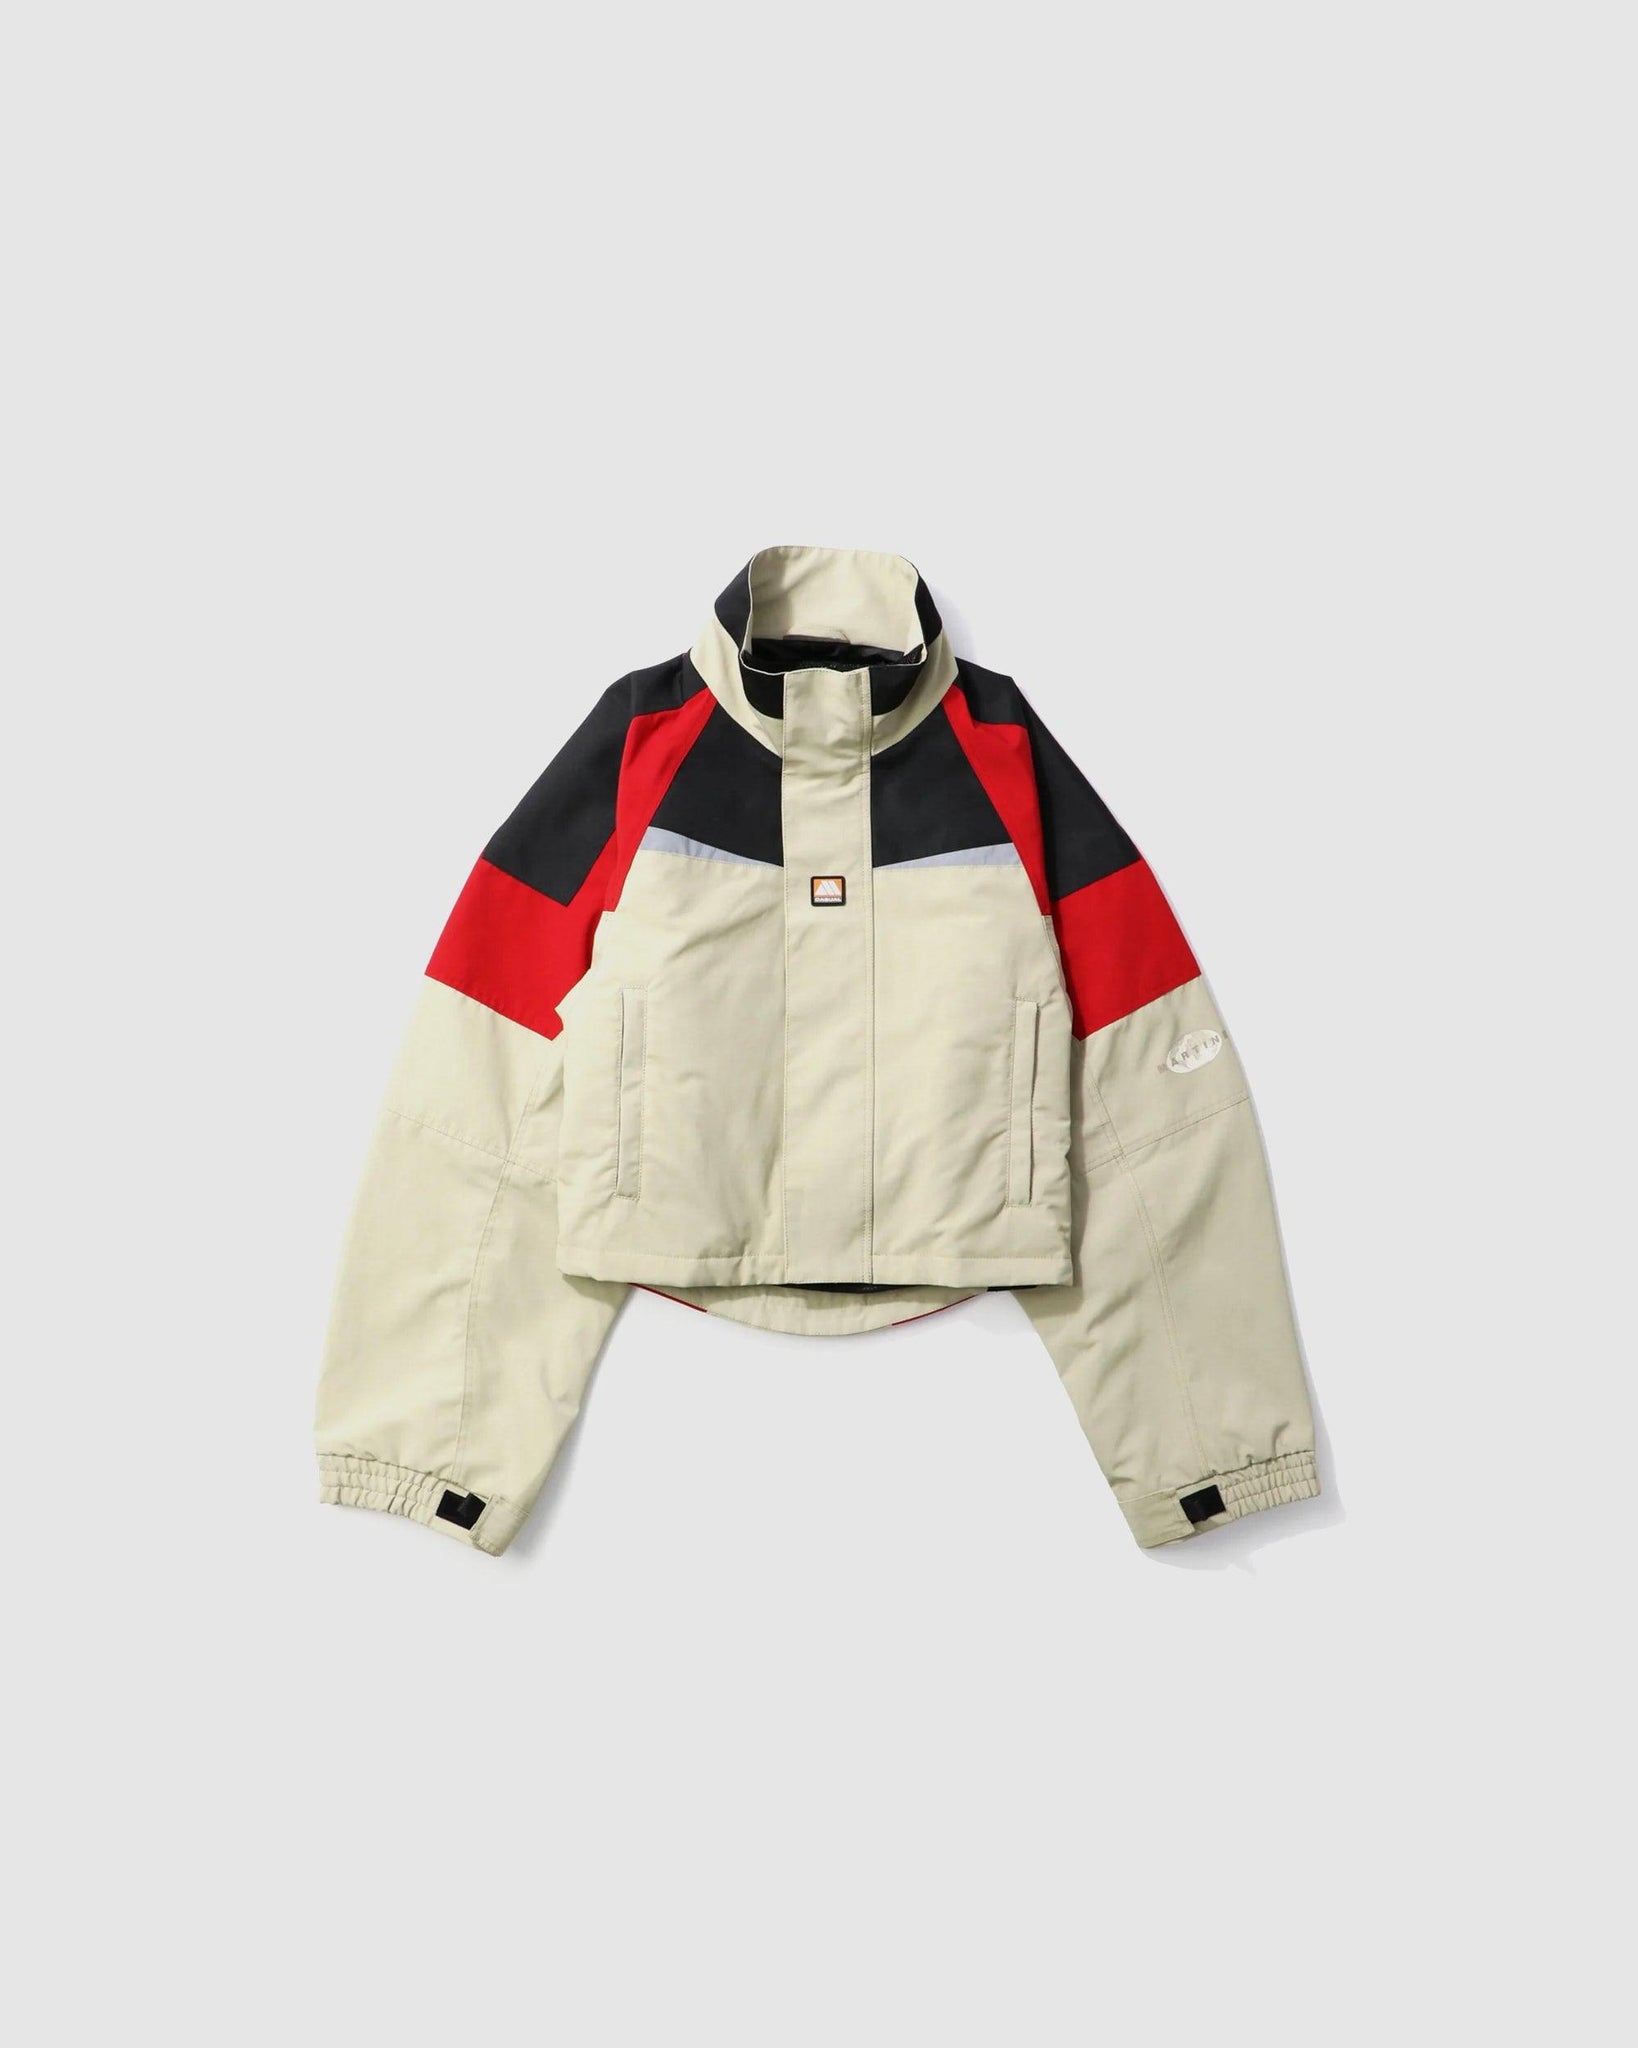 Shrunken Sports Jacket - {{ collection.title }} - Chinatown Country Club 